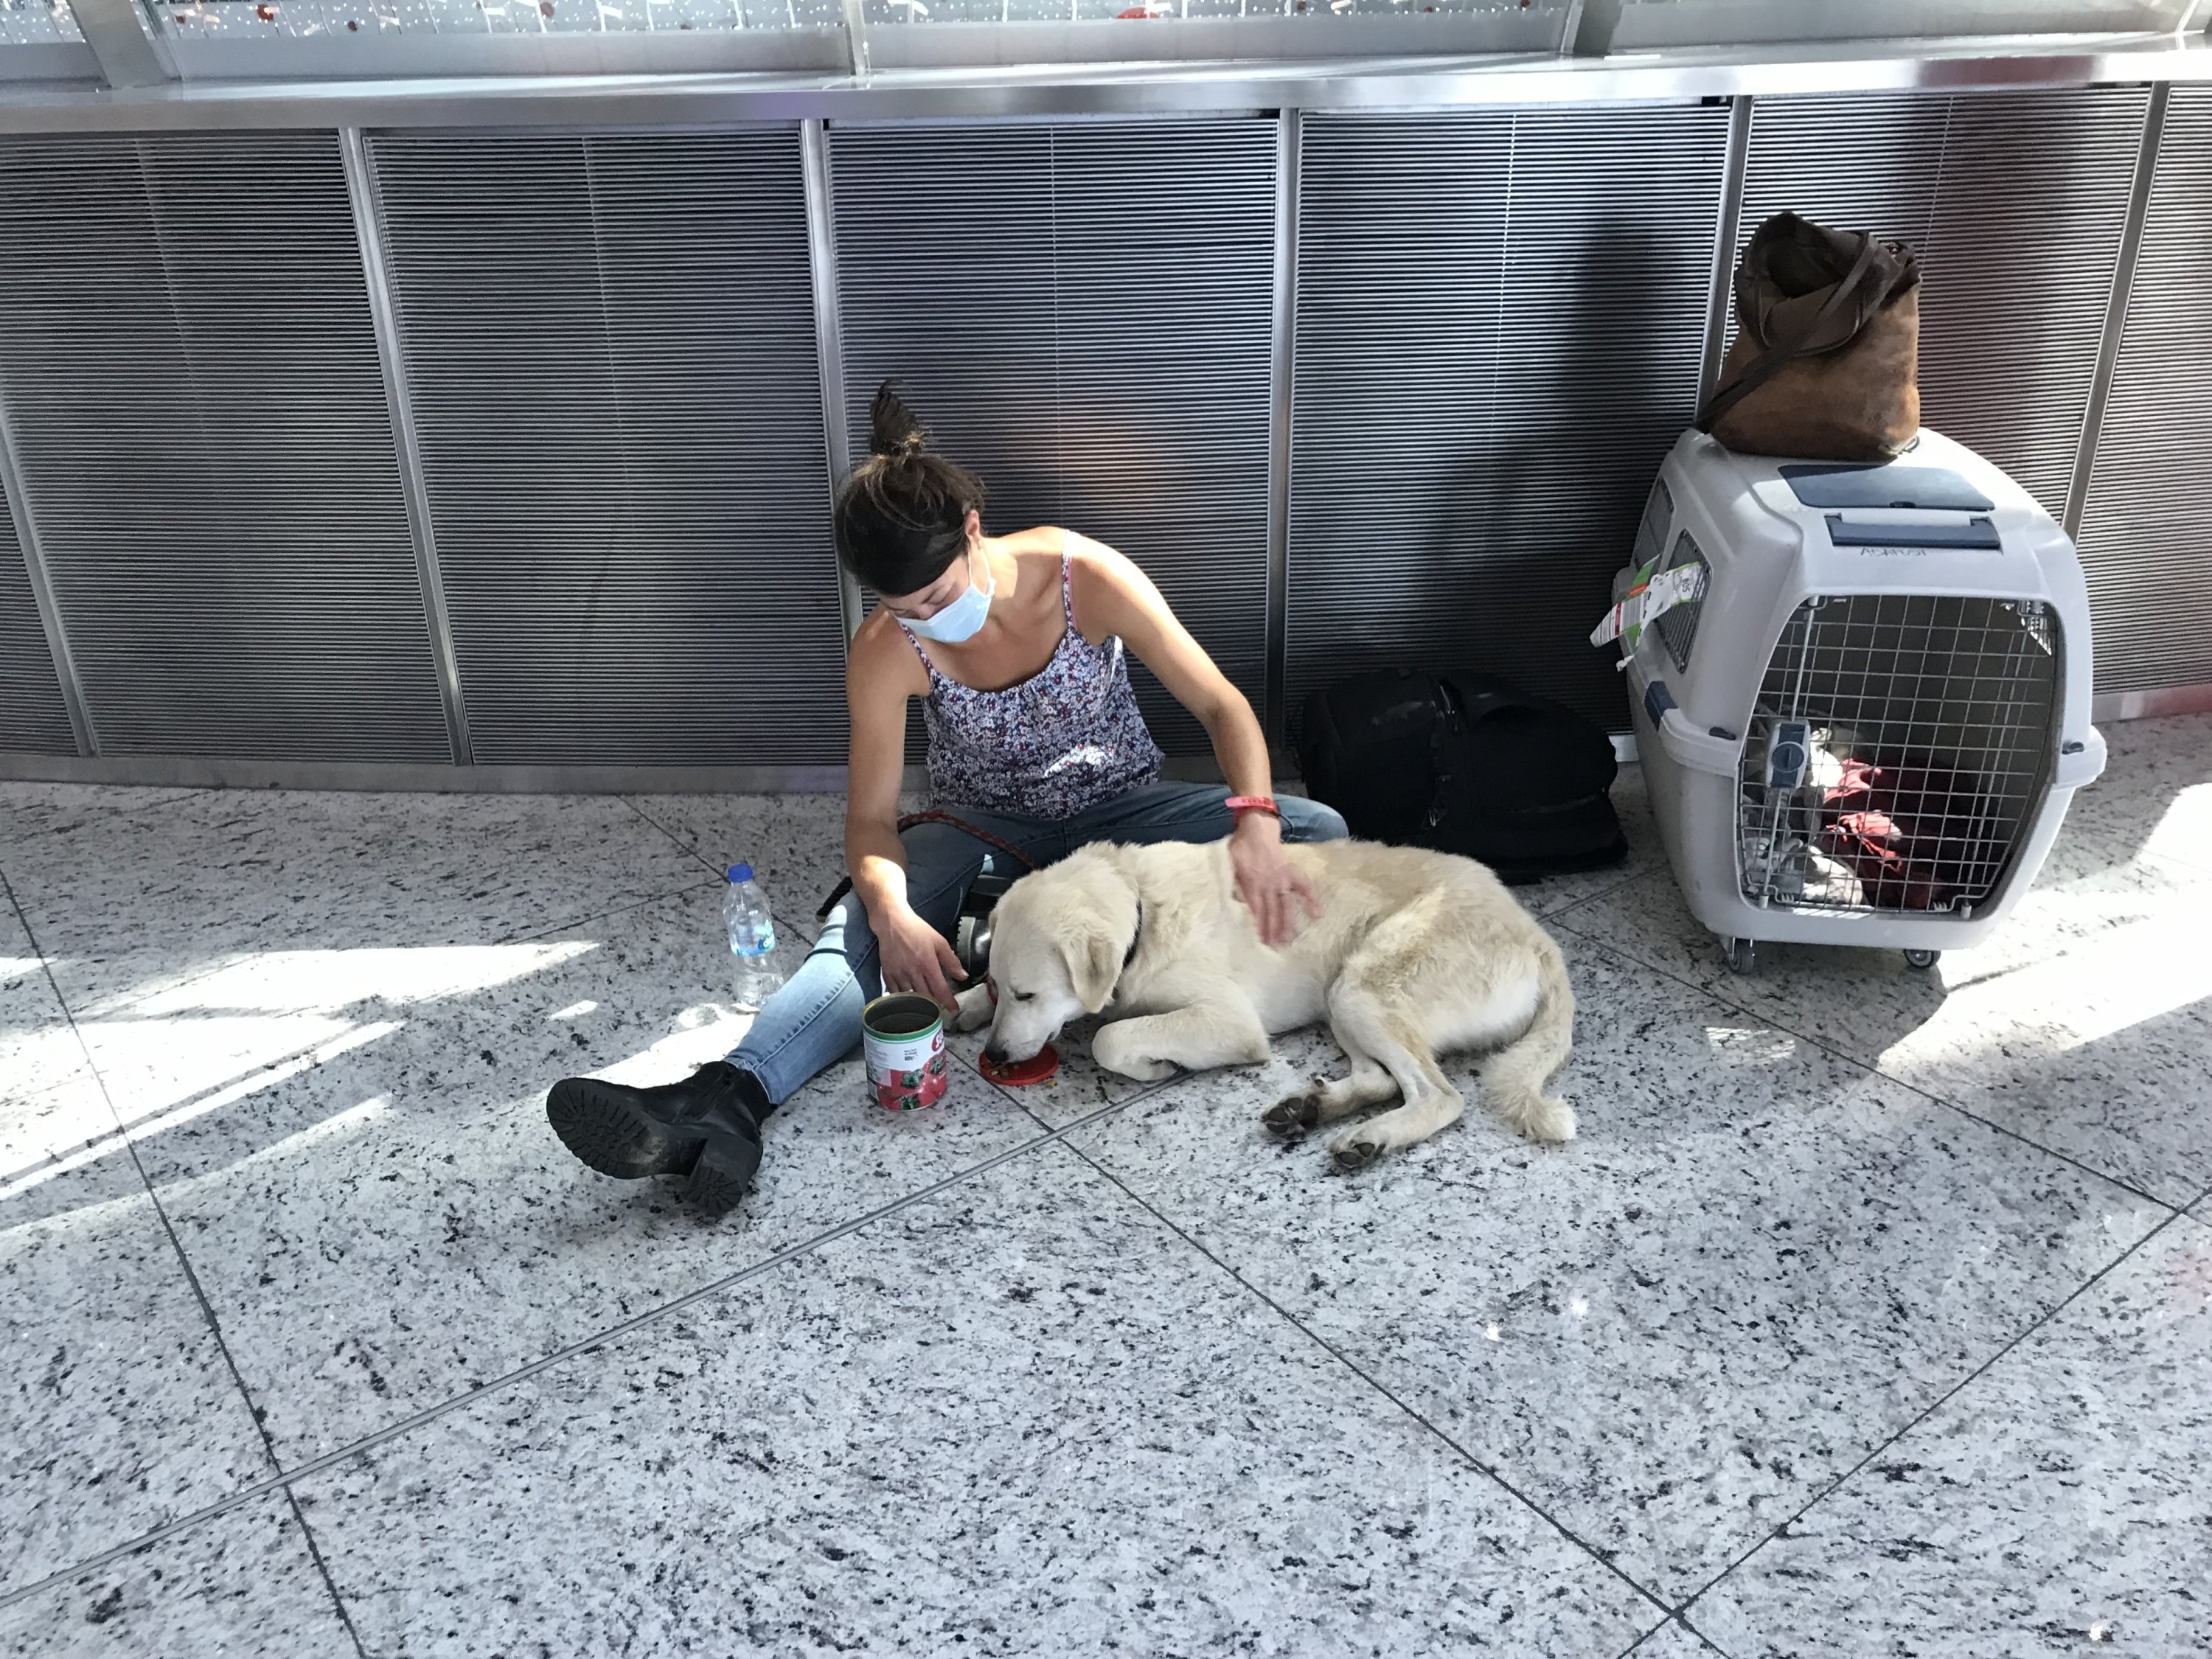 Istanbul Airport has set up a check-in counter and a special room for pets. (AA Photo)